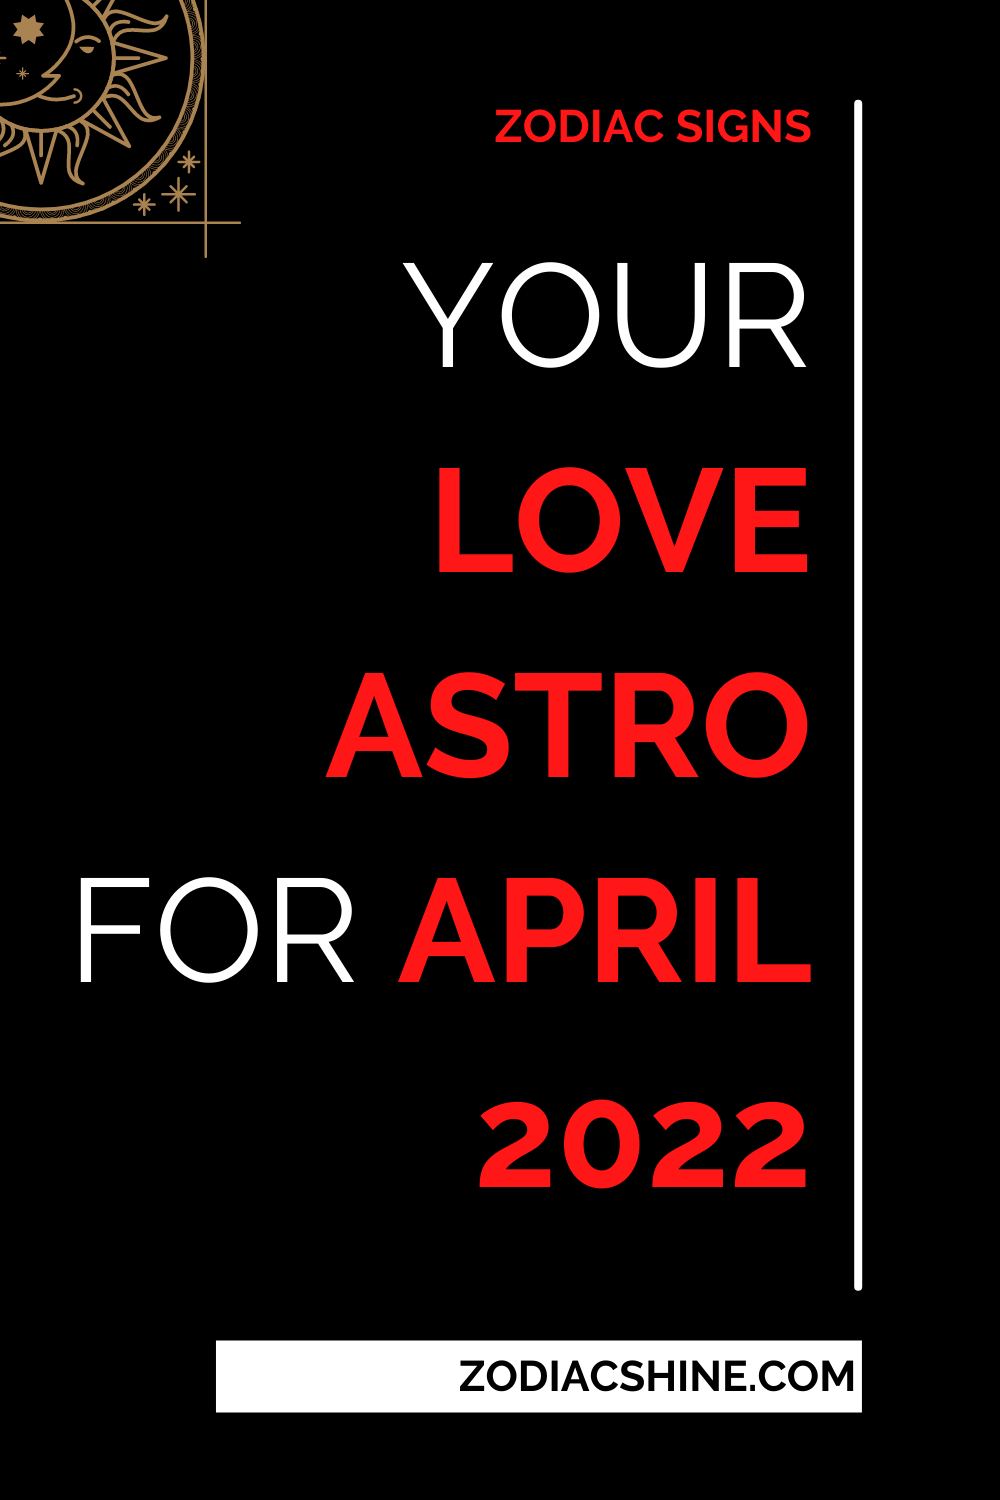 Your Love Astro For April 2022